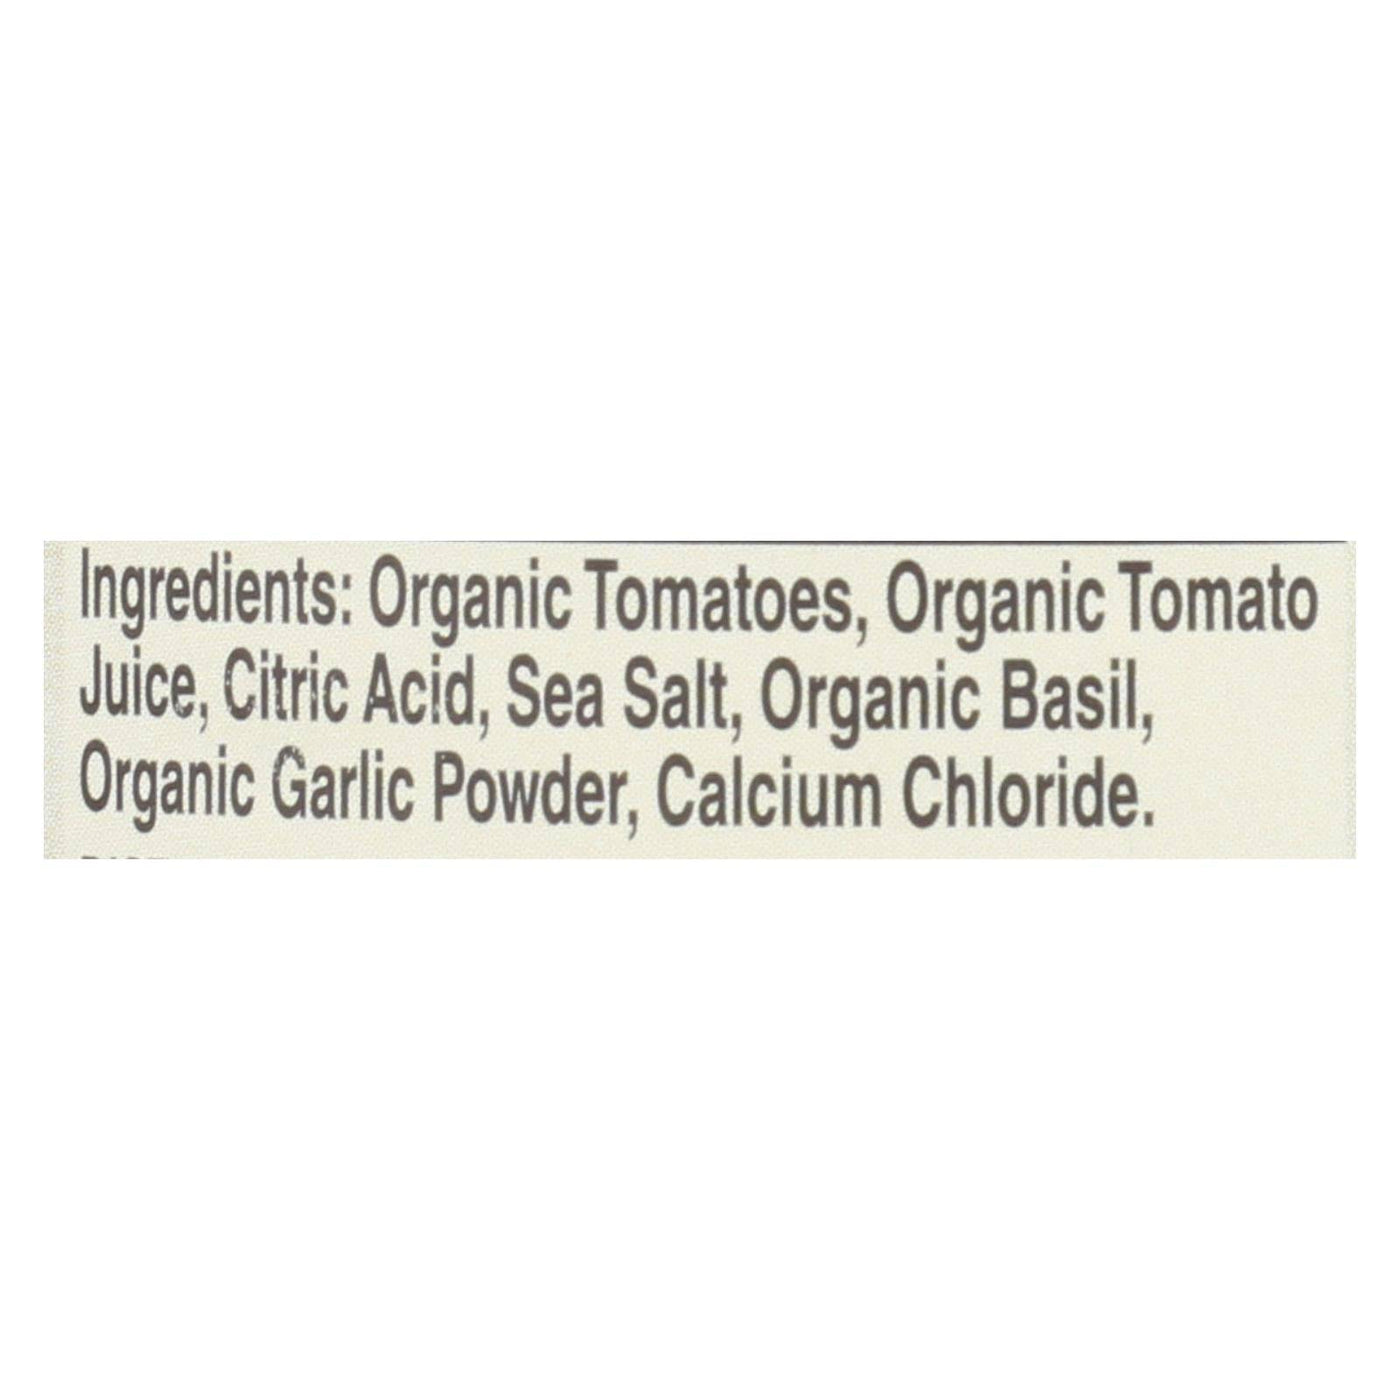 Buy Muir Glen Diced Tomatoes Basil And Garlic - Tomato - Case Of 12 - 14.5 Oz.  at OnlyNaturals.us